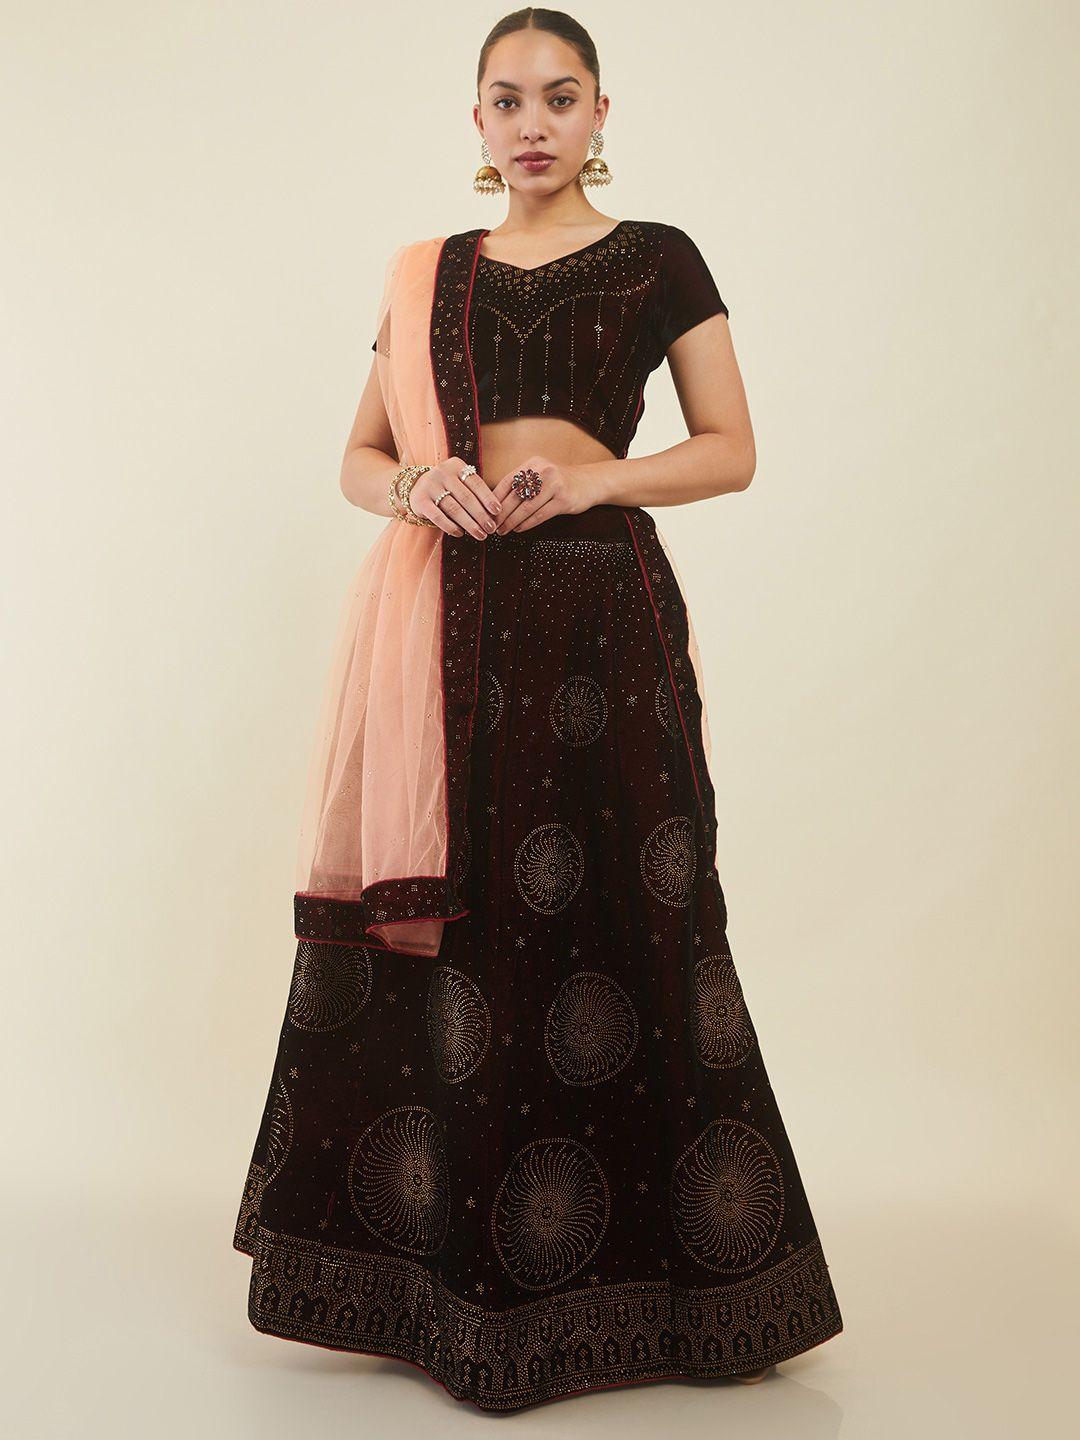 soch embellished beads and stones unstitched lehenga & blouse with dupatta